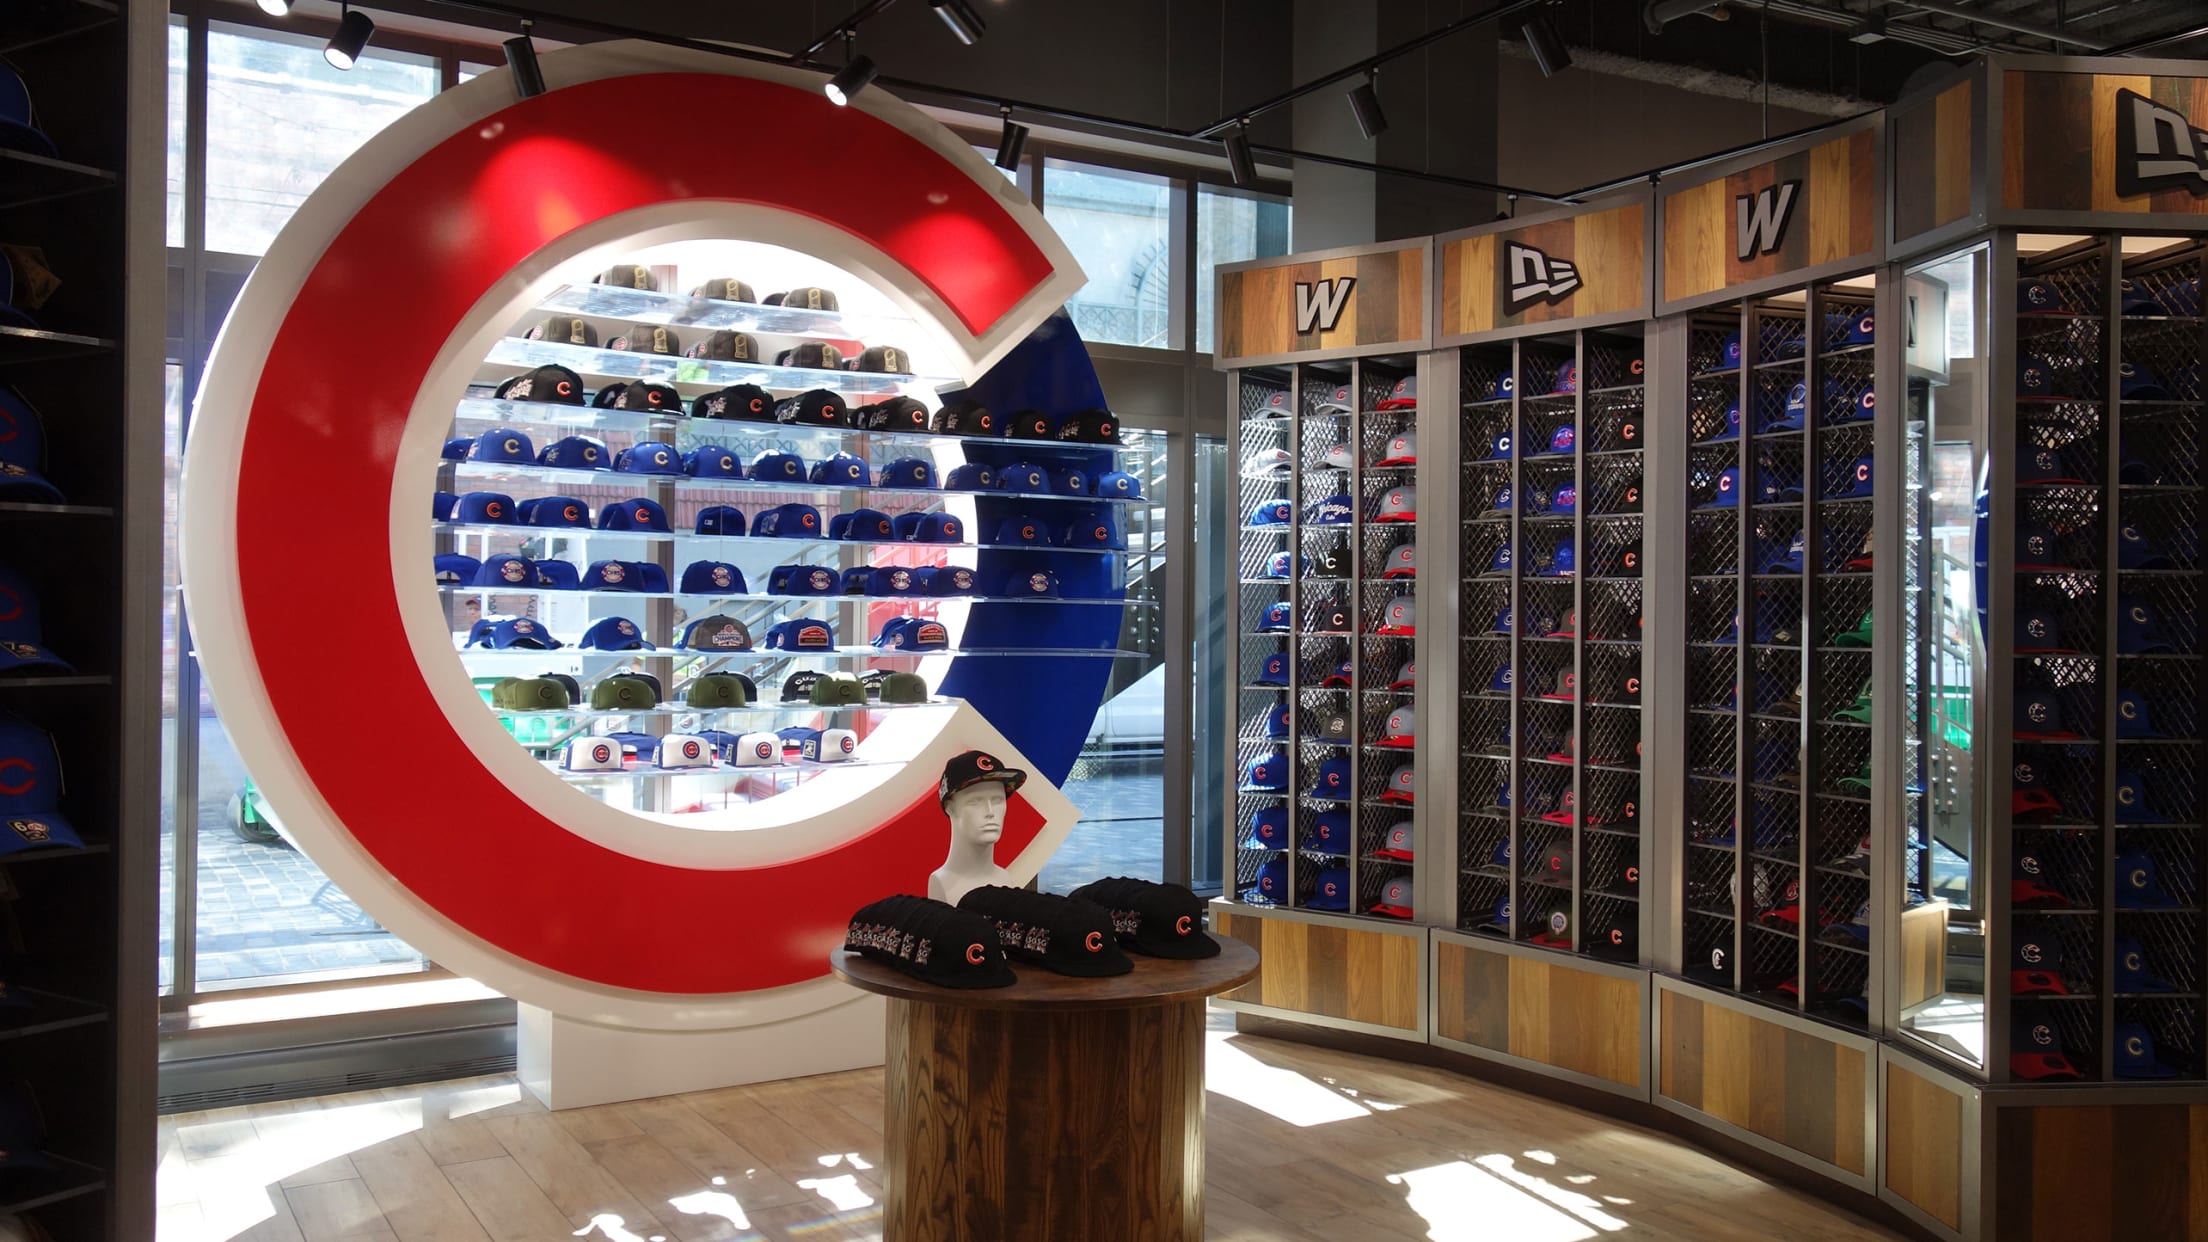 cubs flagship store